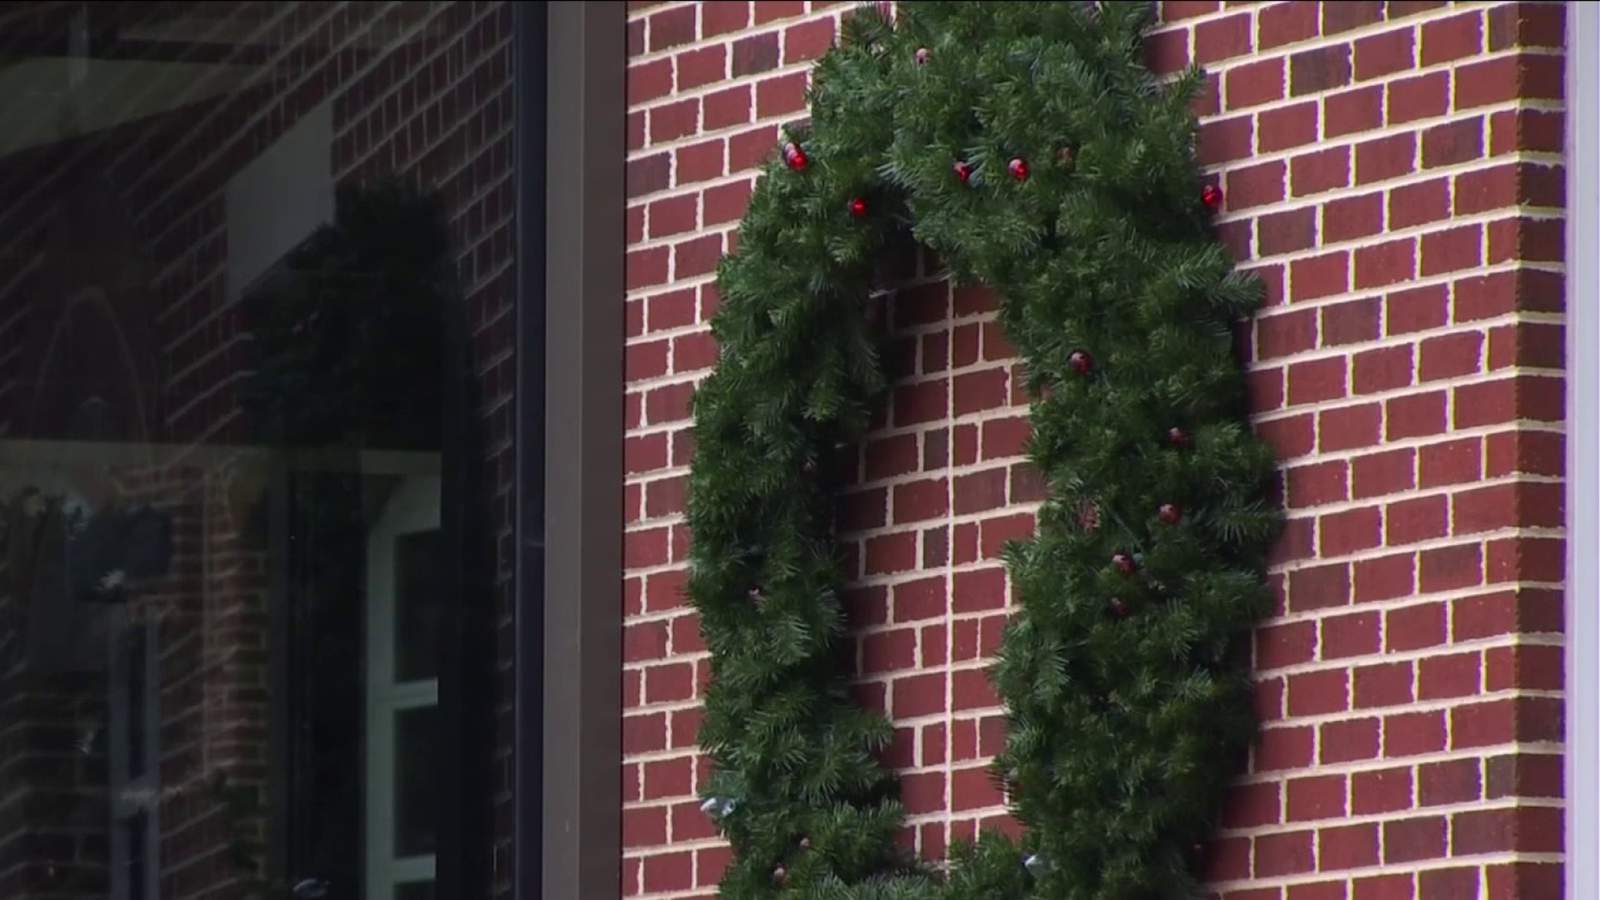 Danville Fire Department sparks fire safety talk with new wreath campaign